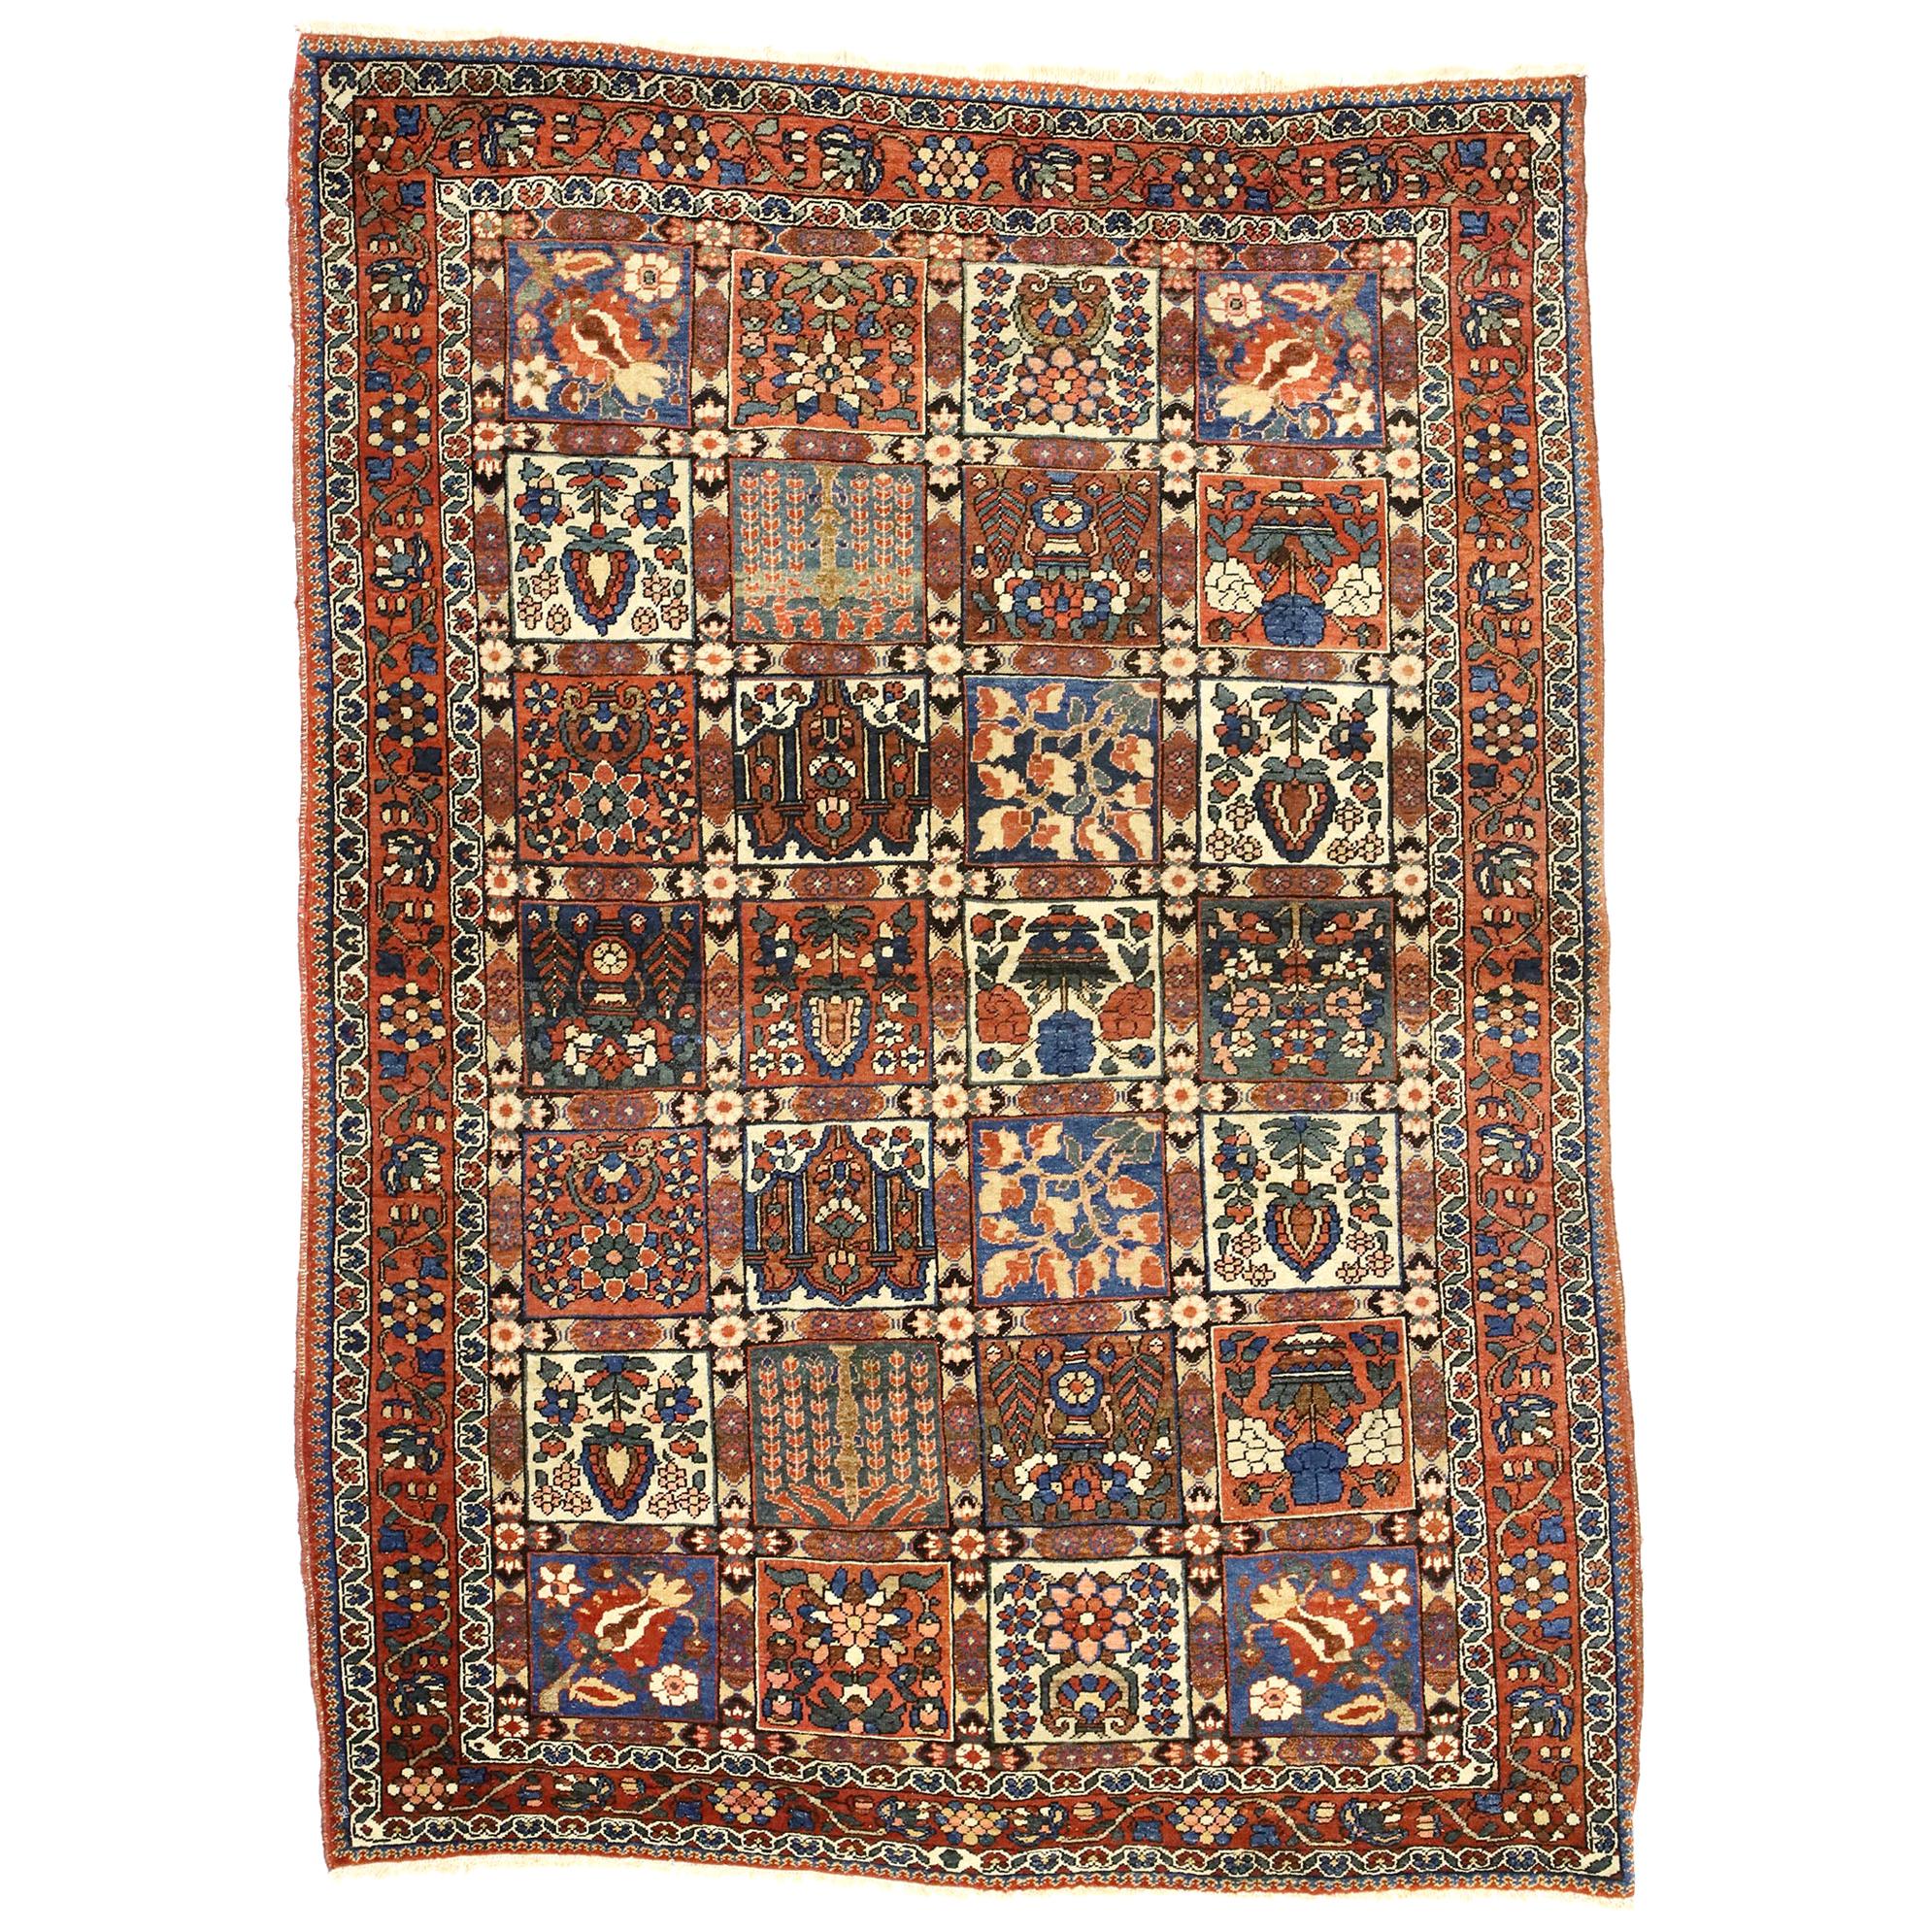 Rustic Style Antique Persian Bakhtiari Rug with Four Seasons Garden Design For Sale